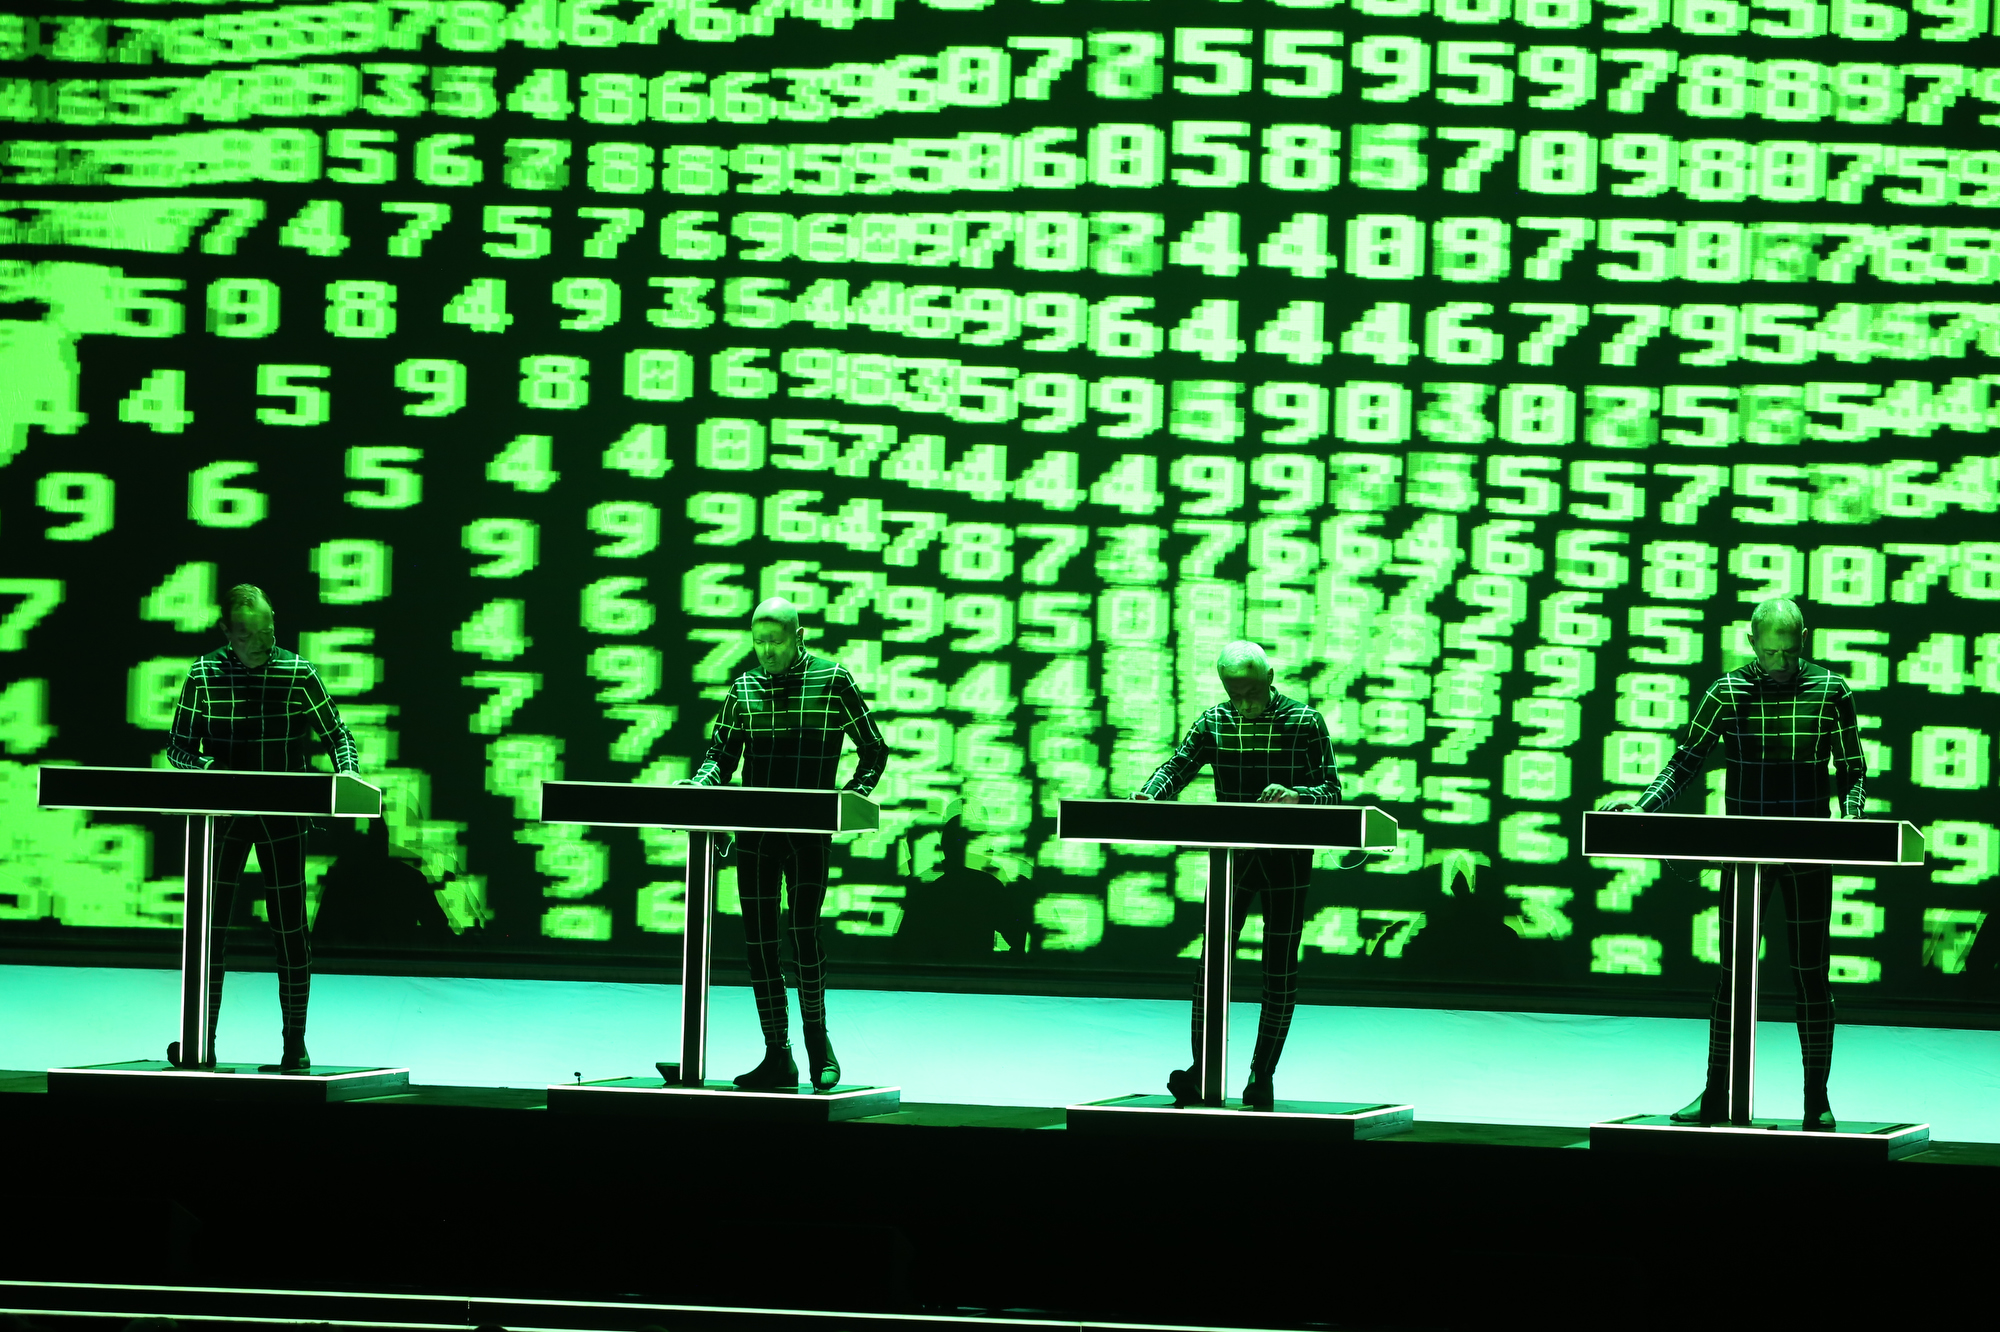 Kraftwerk is the weirdest, most exhilarating thing to come to